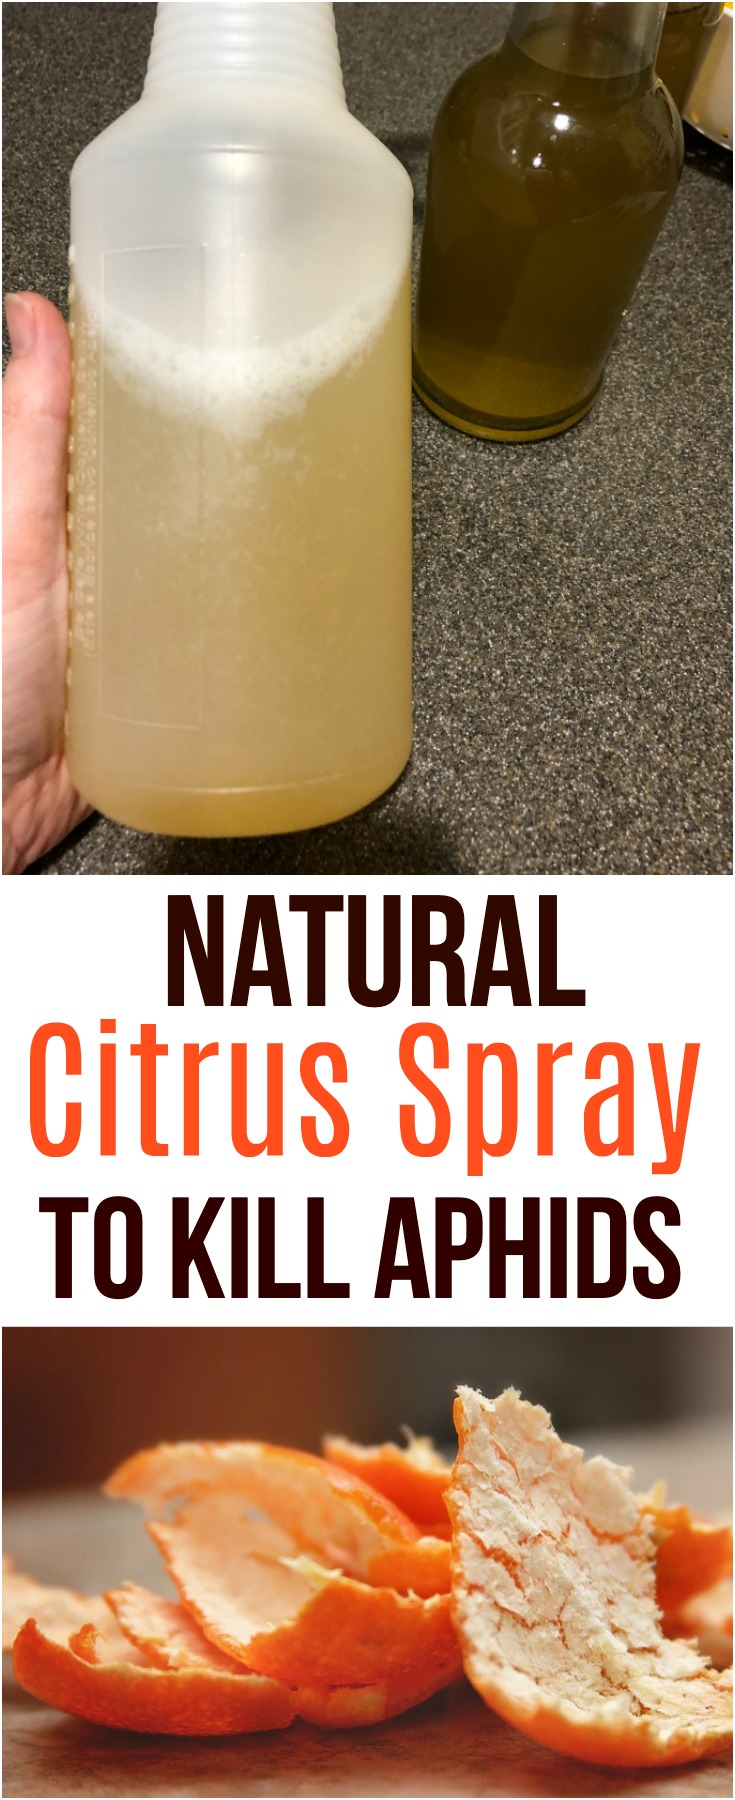 This natural orange spray is simple to make and an effective way to prevent aphids from taking over your favorite plants.